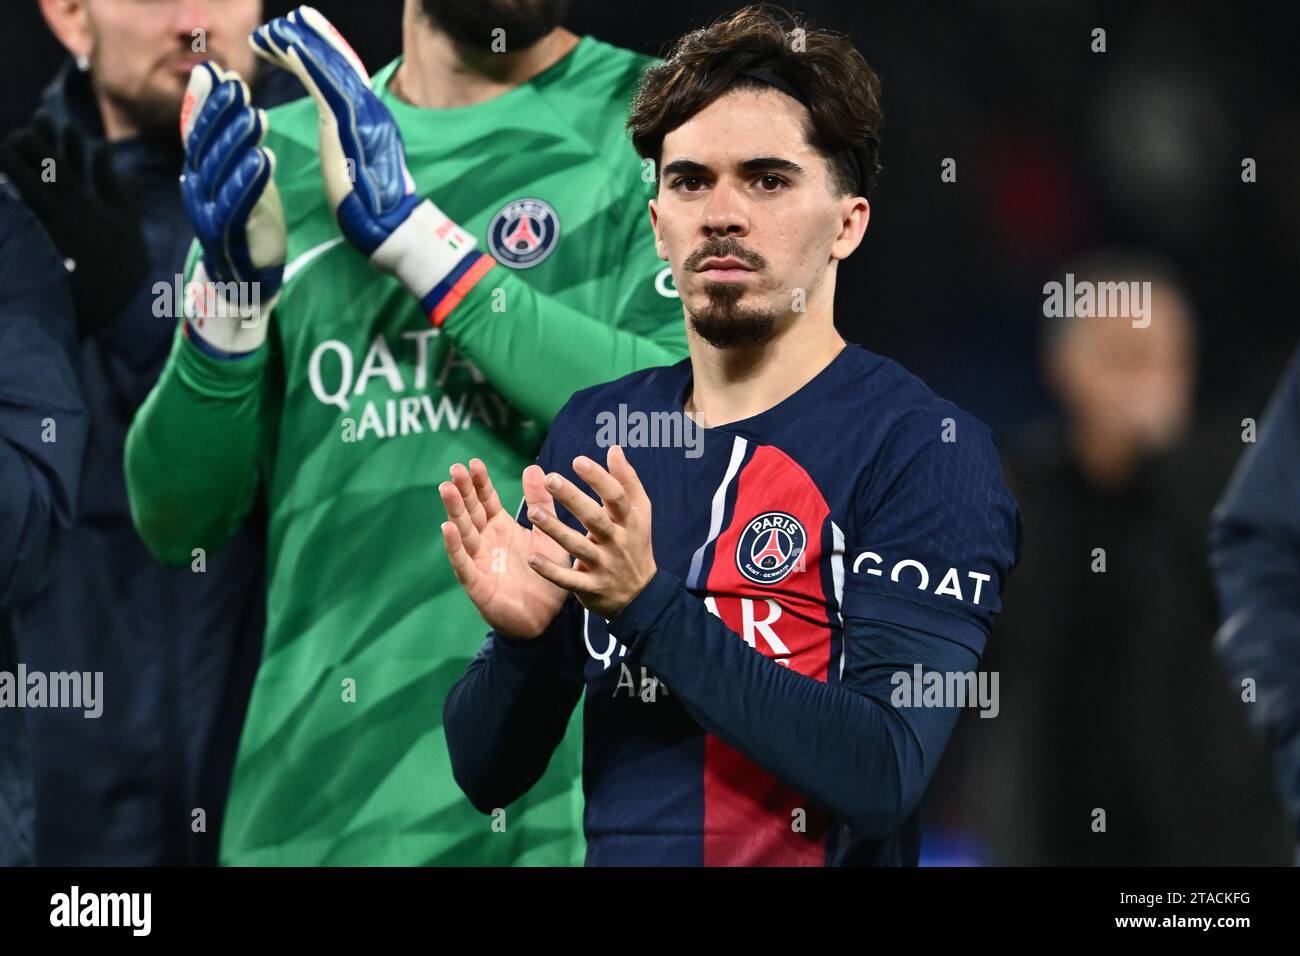 PARIS, FRANCE - NOVEMBER 28: Vitinha of PSG applauds fans during the UEFA Champions League match between Paris Saint-Germain and Newcastle United FC a Stock Photo